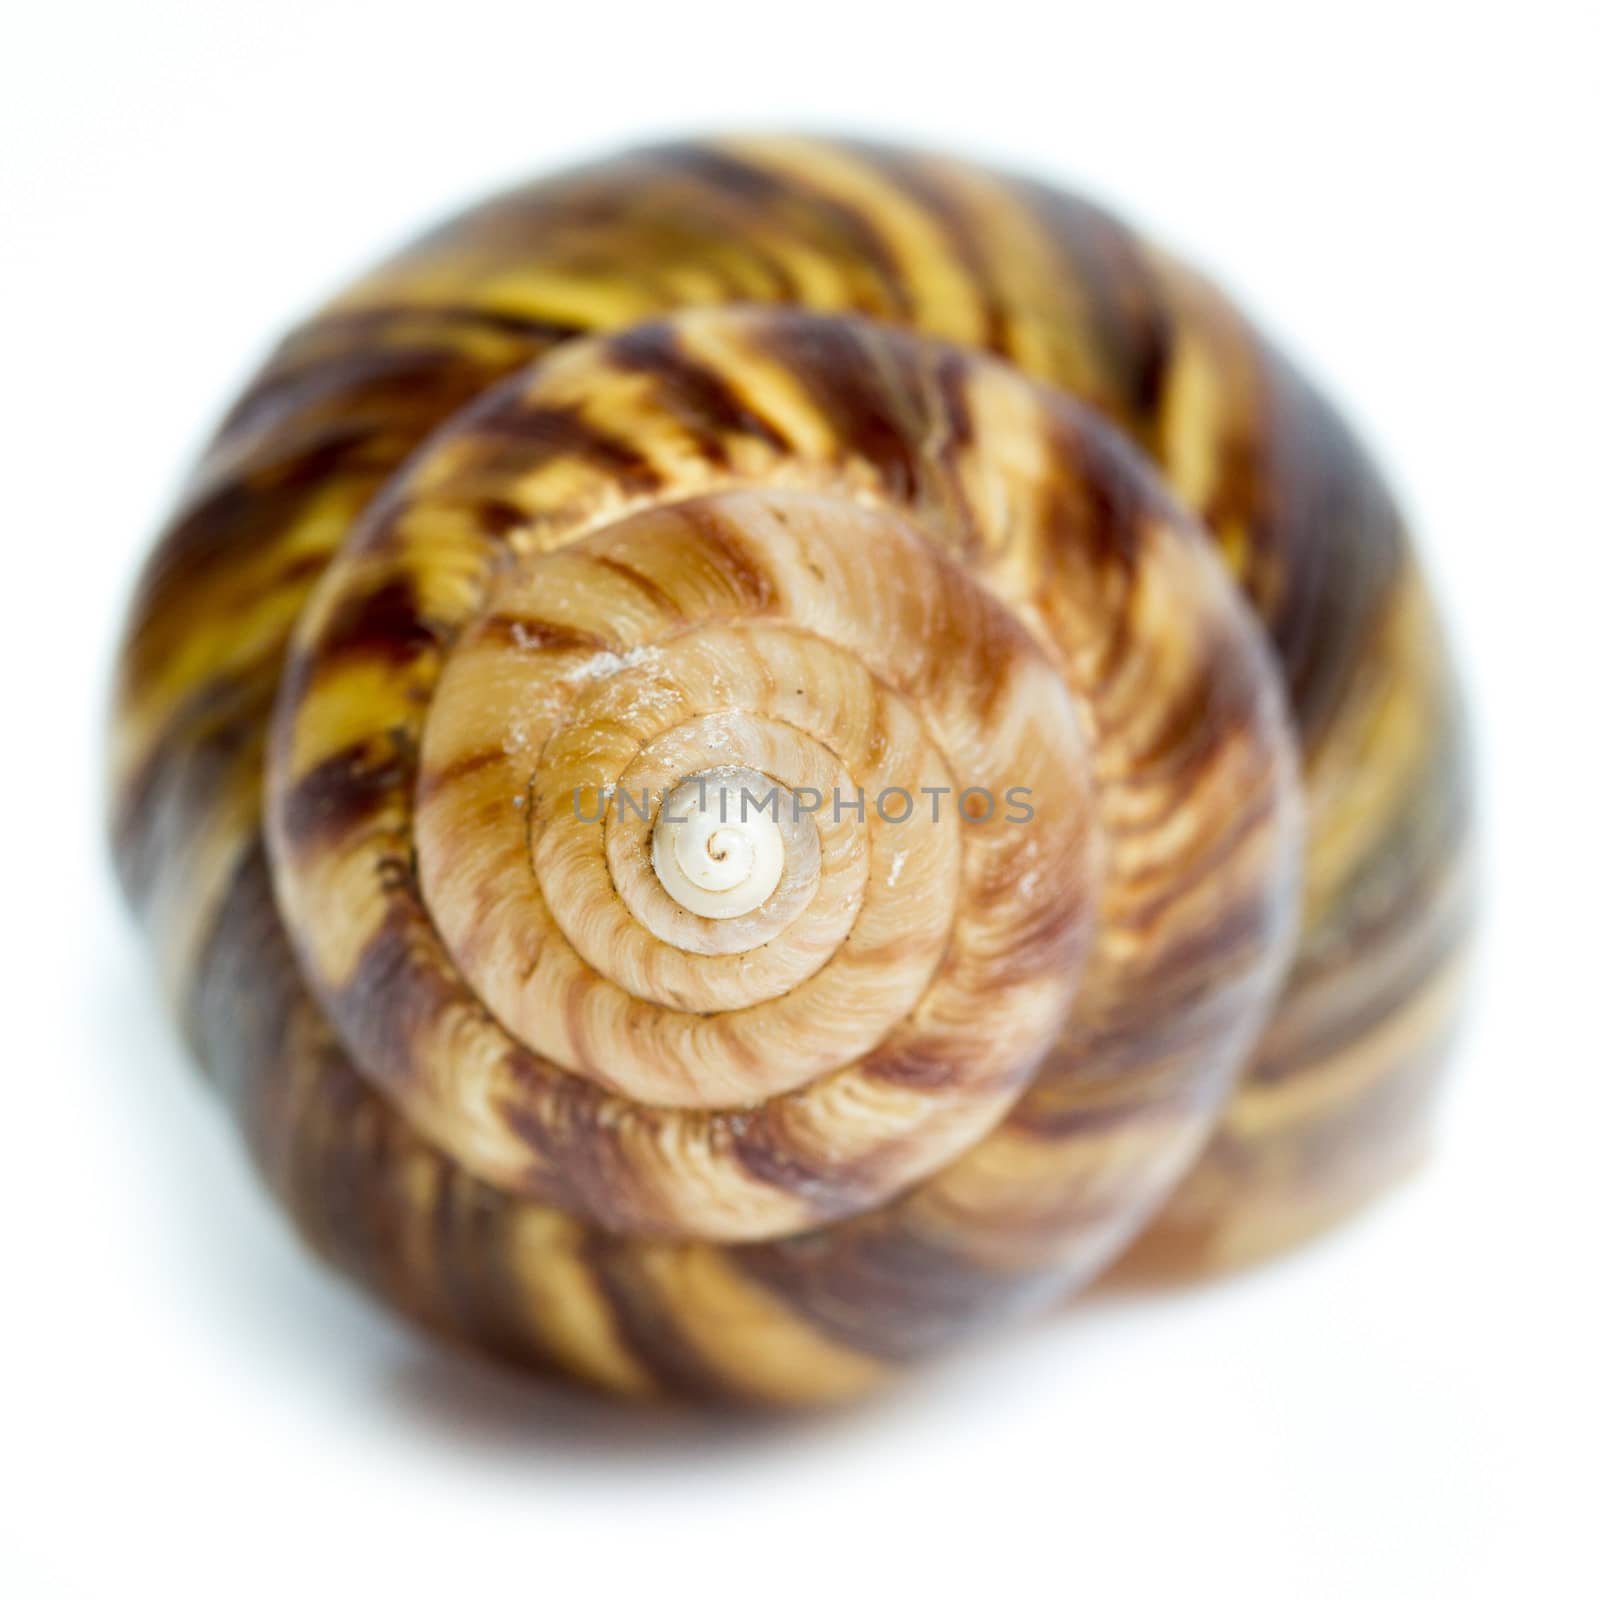 spiral shell on white background - closed up